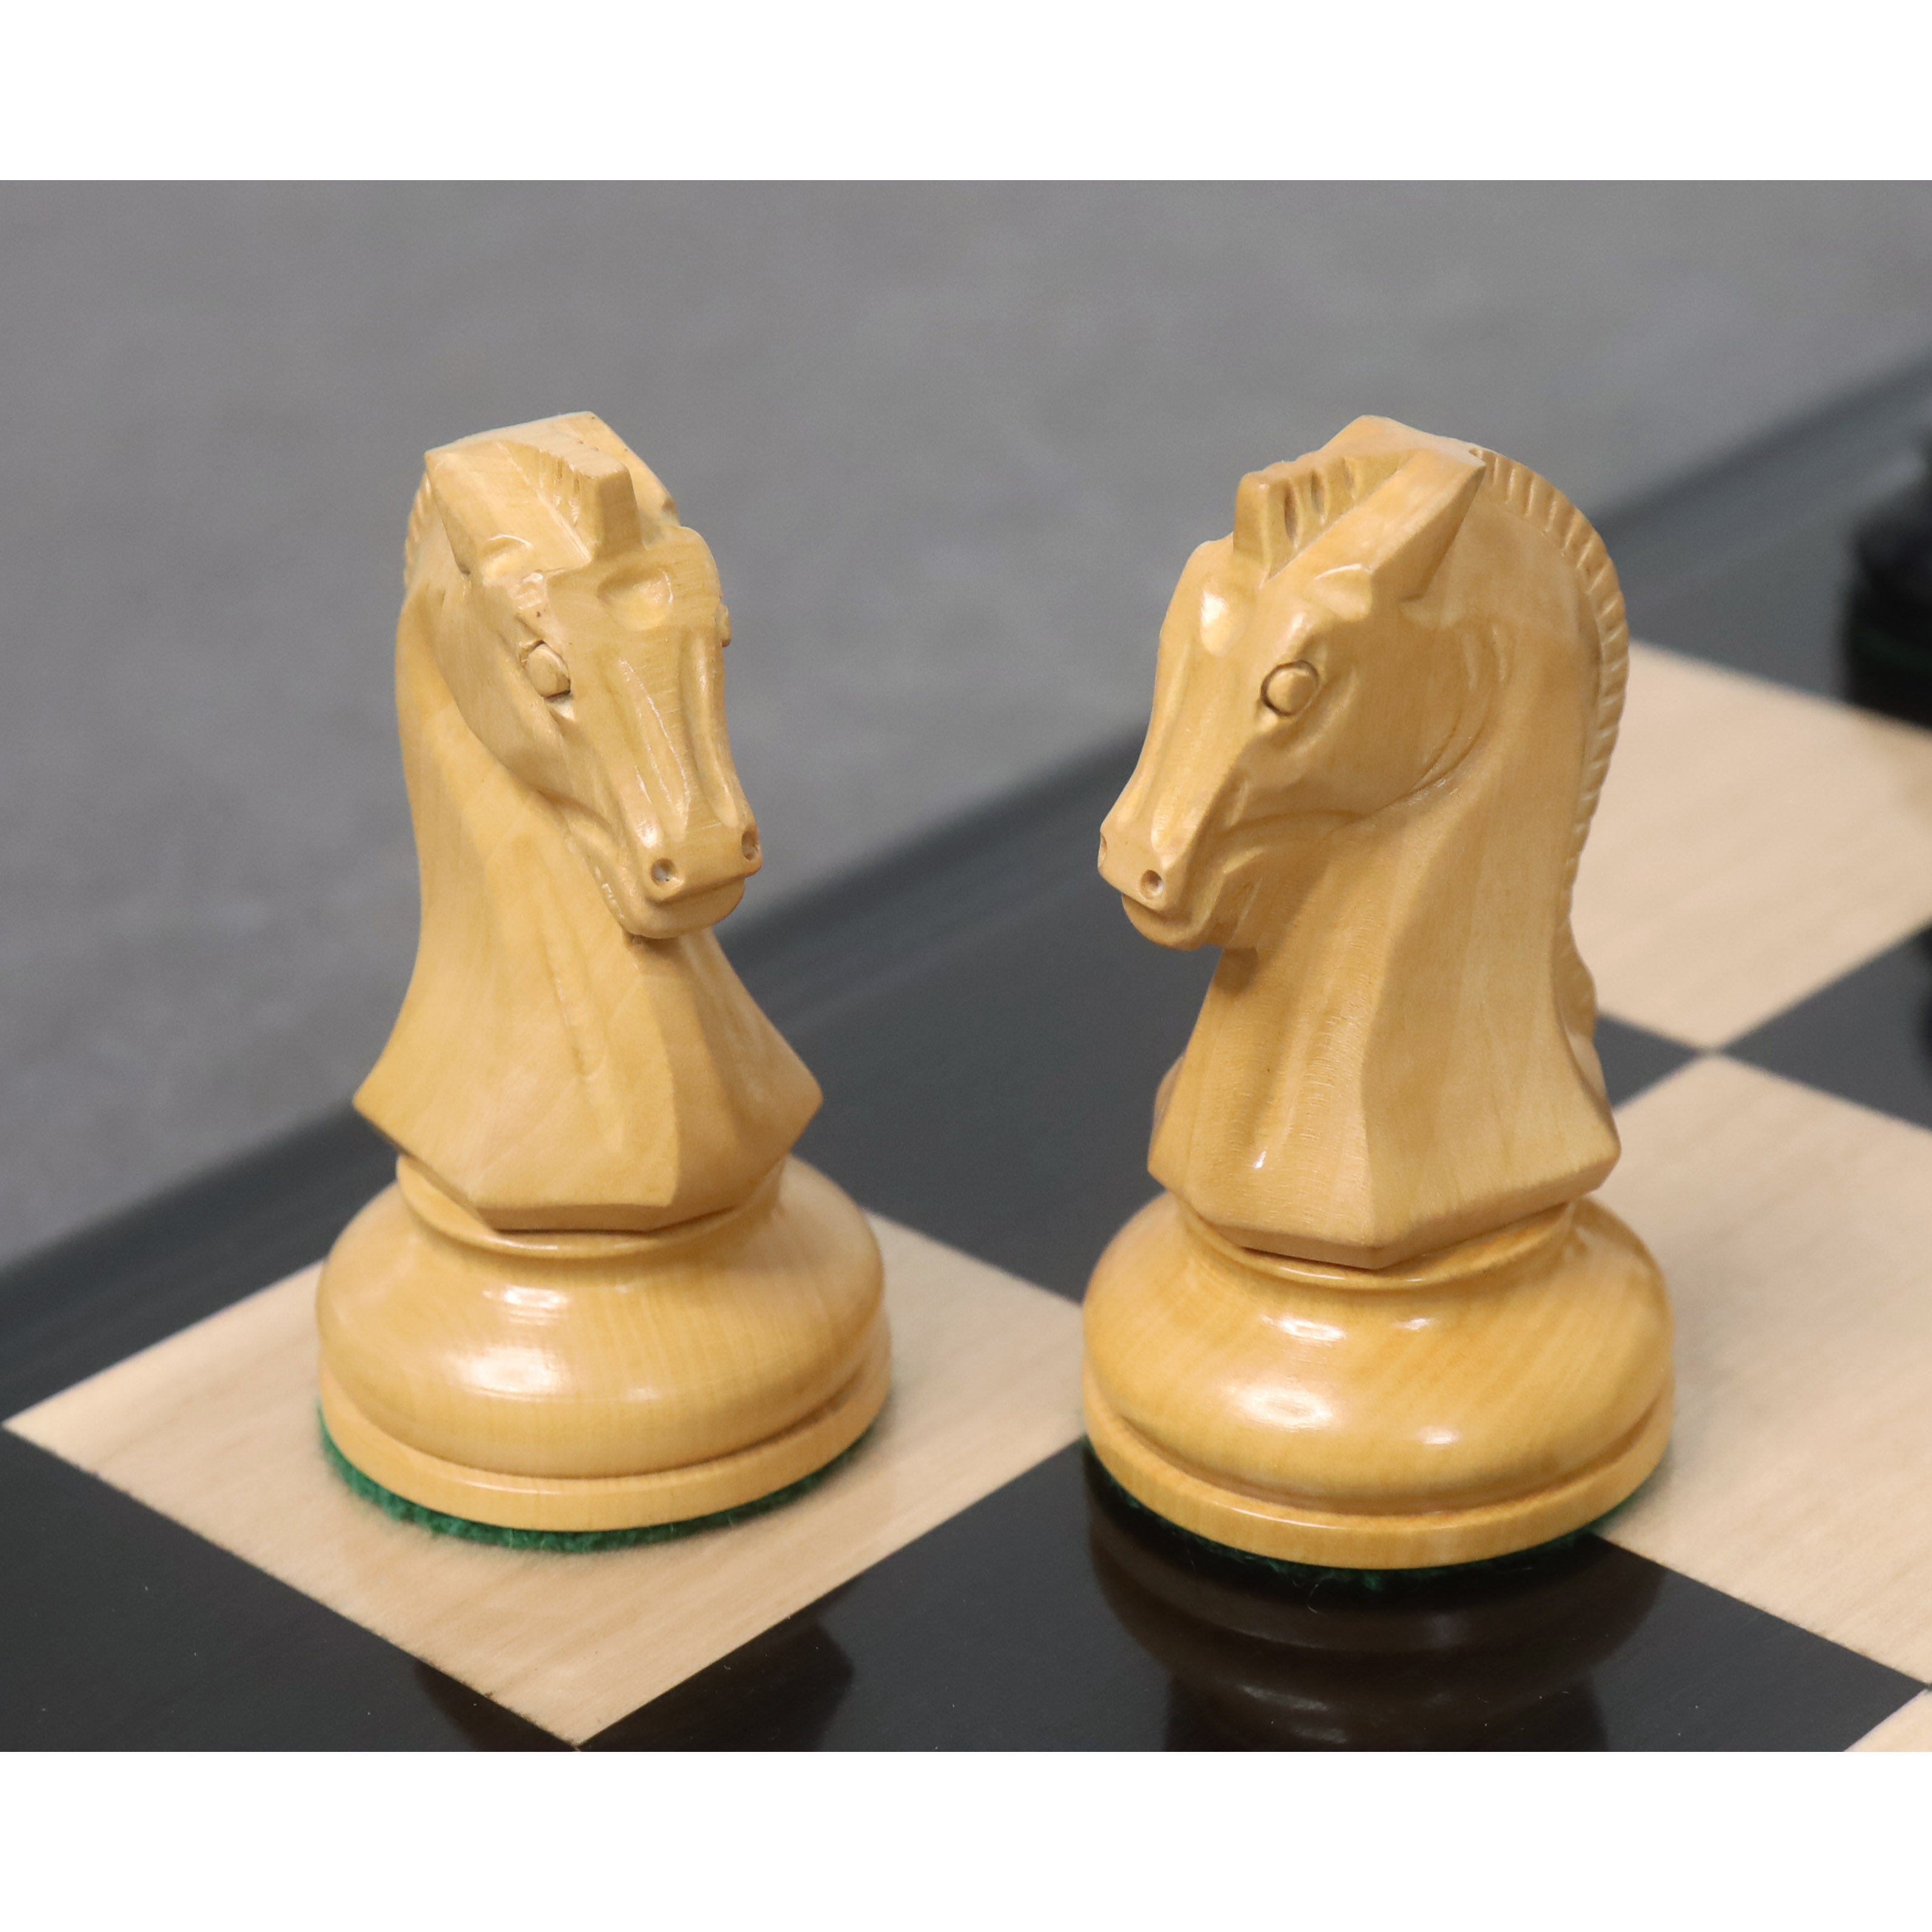 Prison chess set from the 1950s - made out of toilet paper, dried bread and  shoe paste. : r/chess